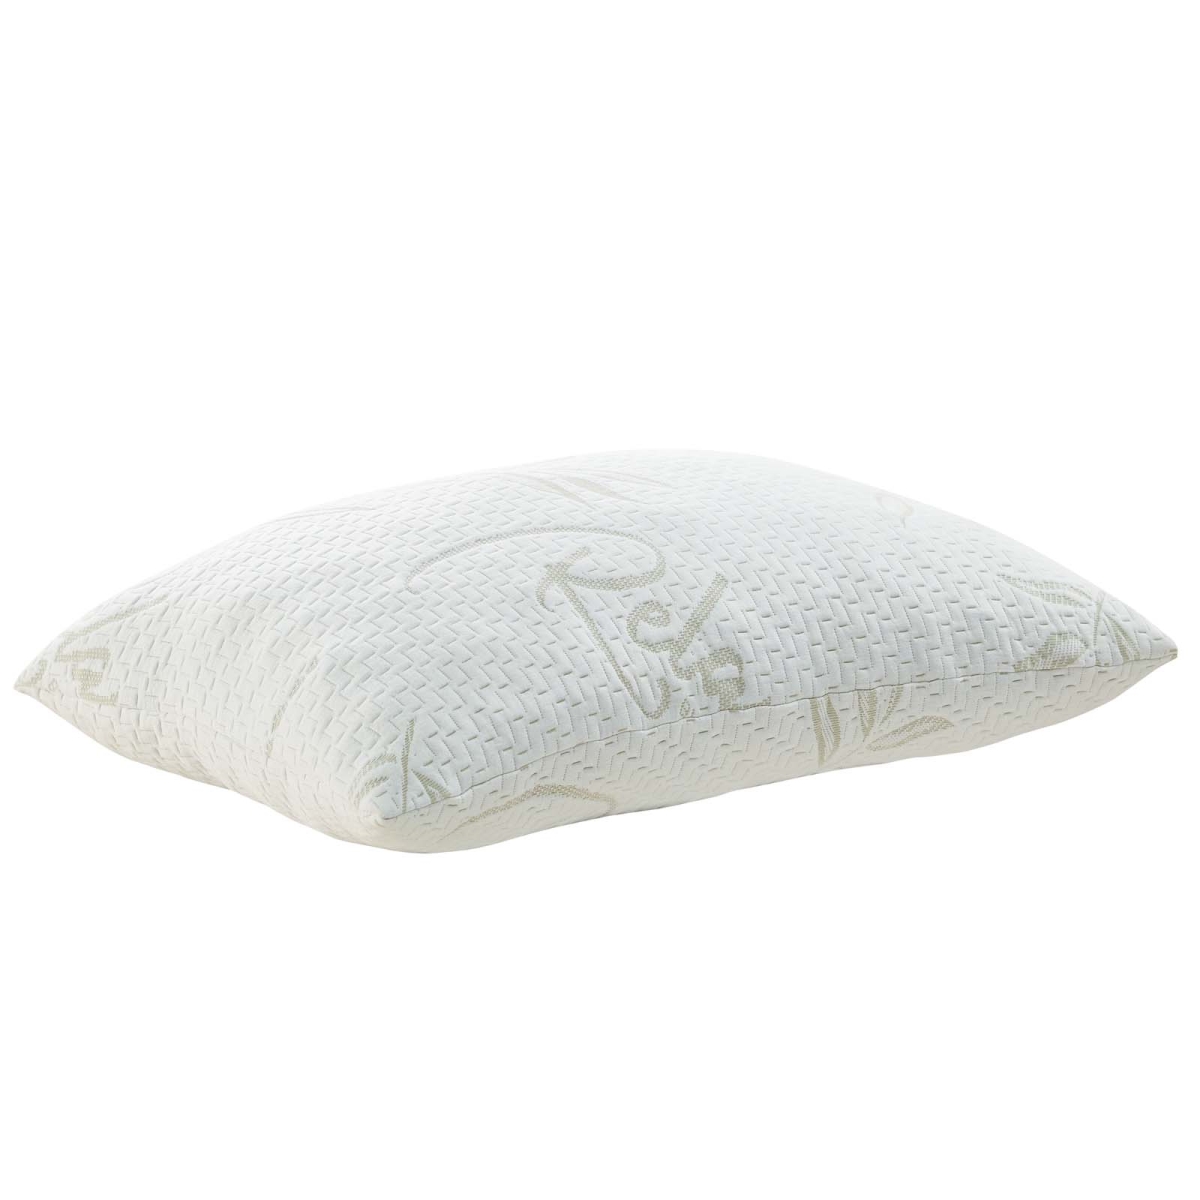 Modway Mod-5575-whi 36.5 H X 60.5w X 81 L In. Relax Standard Queen Size Pillow, White